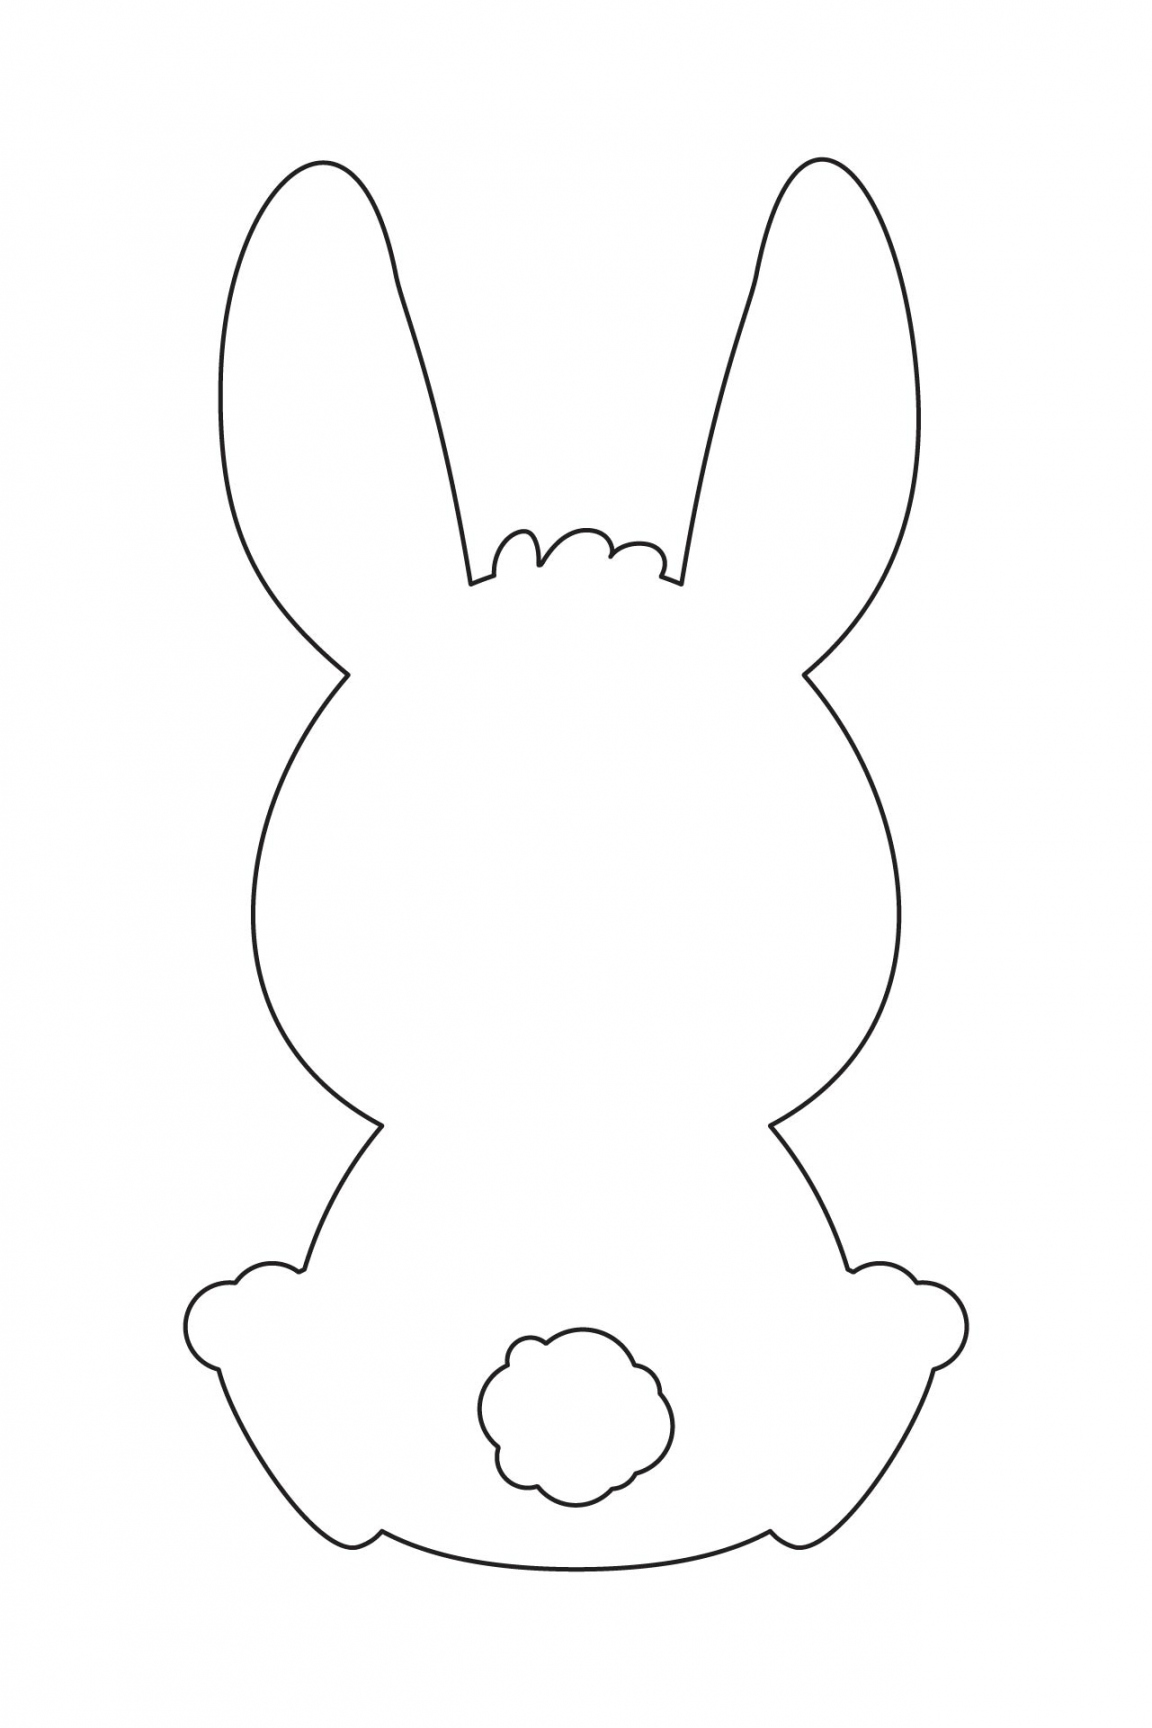 Best Free Printable Easter Bunny Stencil - printablee - Free Printable Easter Bunny Template